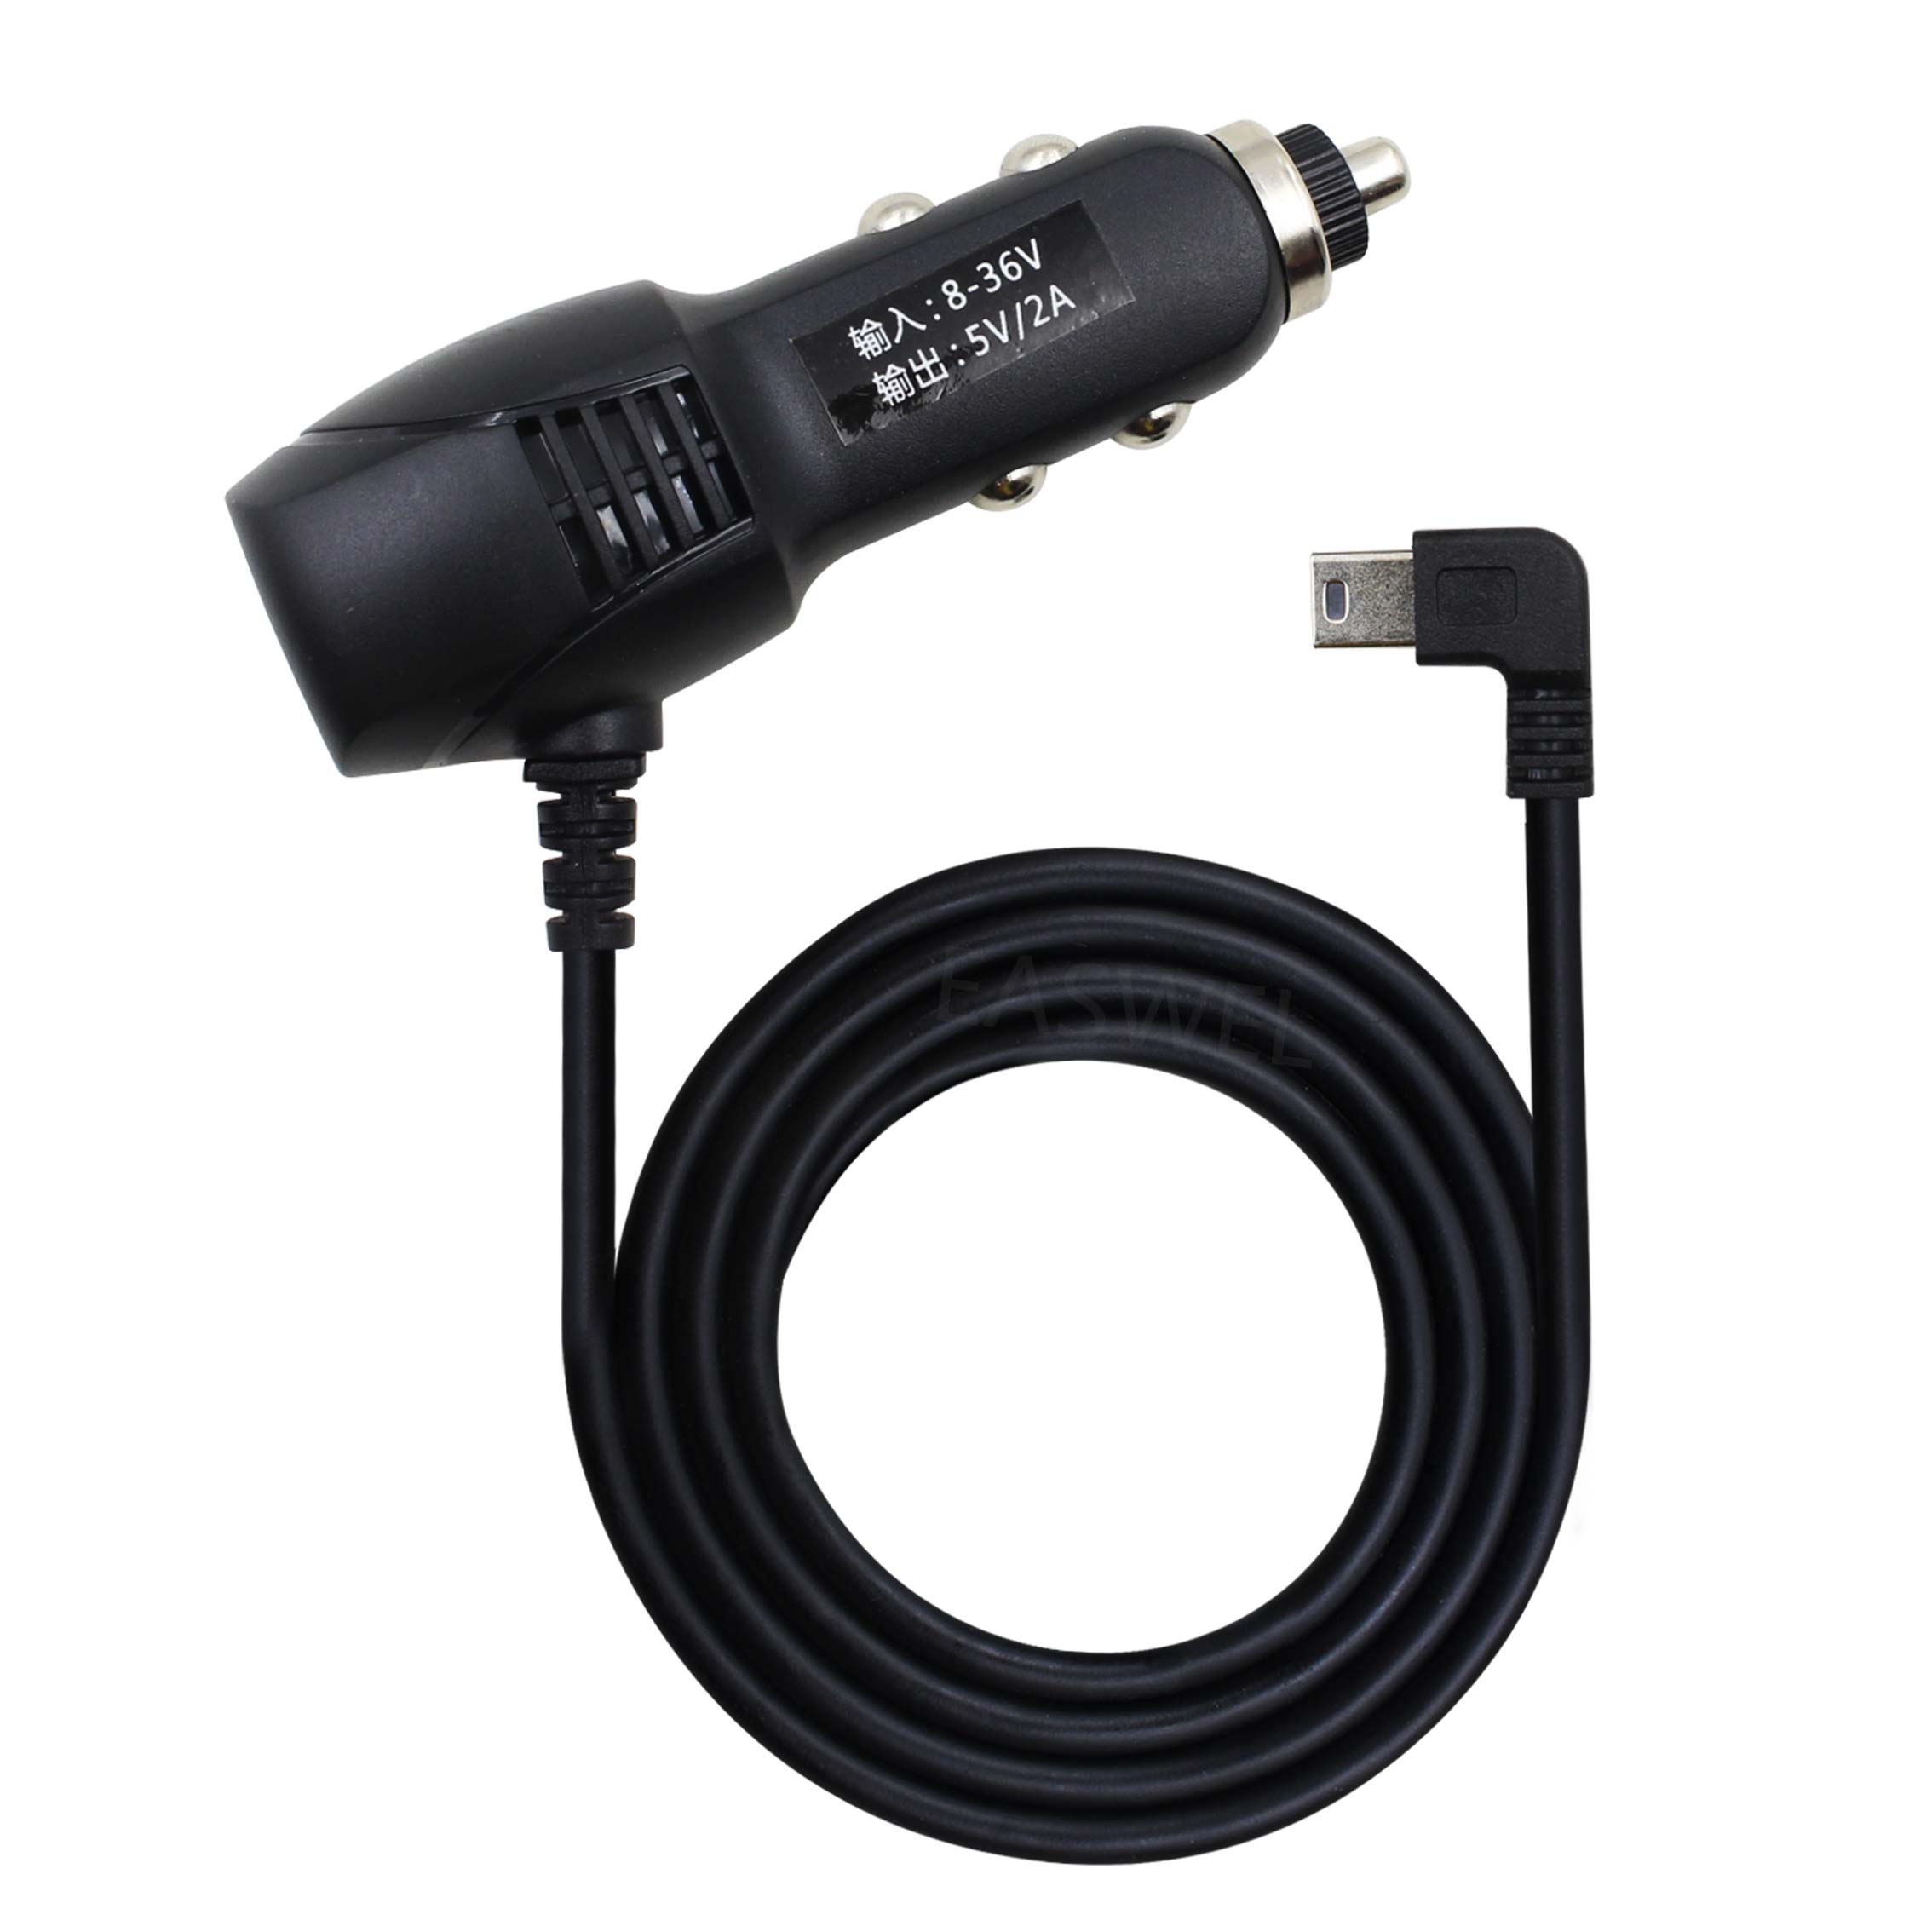 Usb Auto Charger Power Cable Voor Garmin Gps Dezl 770Lmthd 760 Lm/T 2559 Lm/T